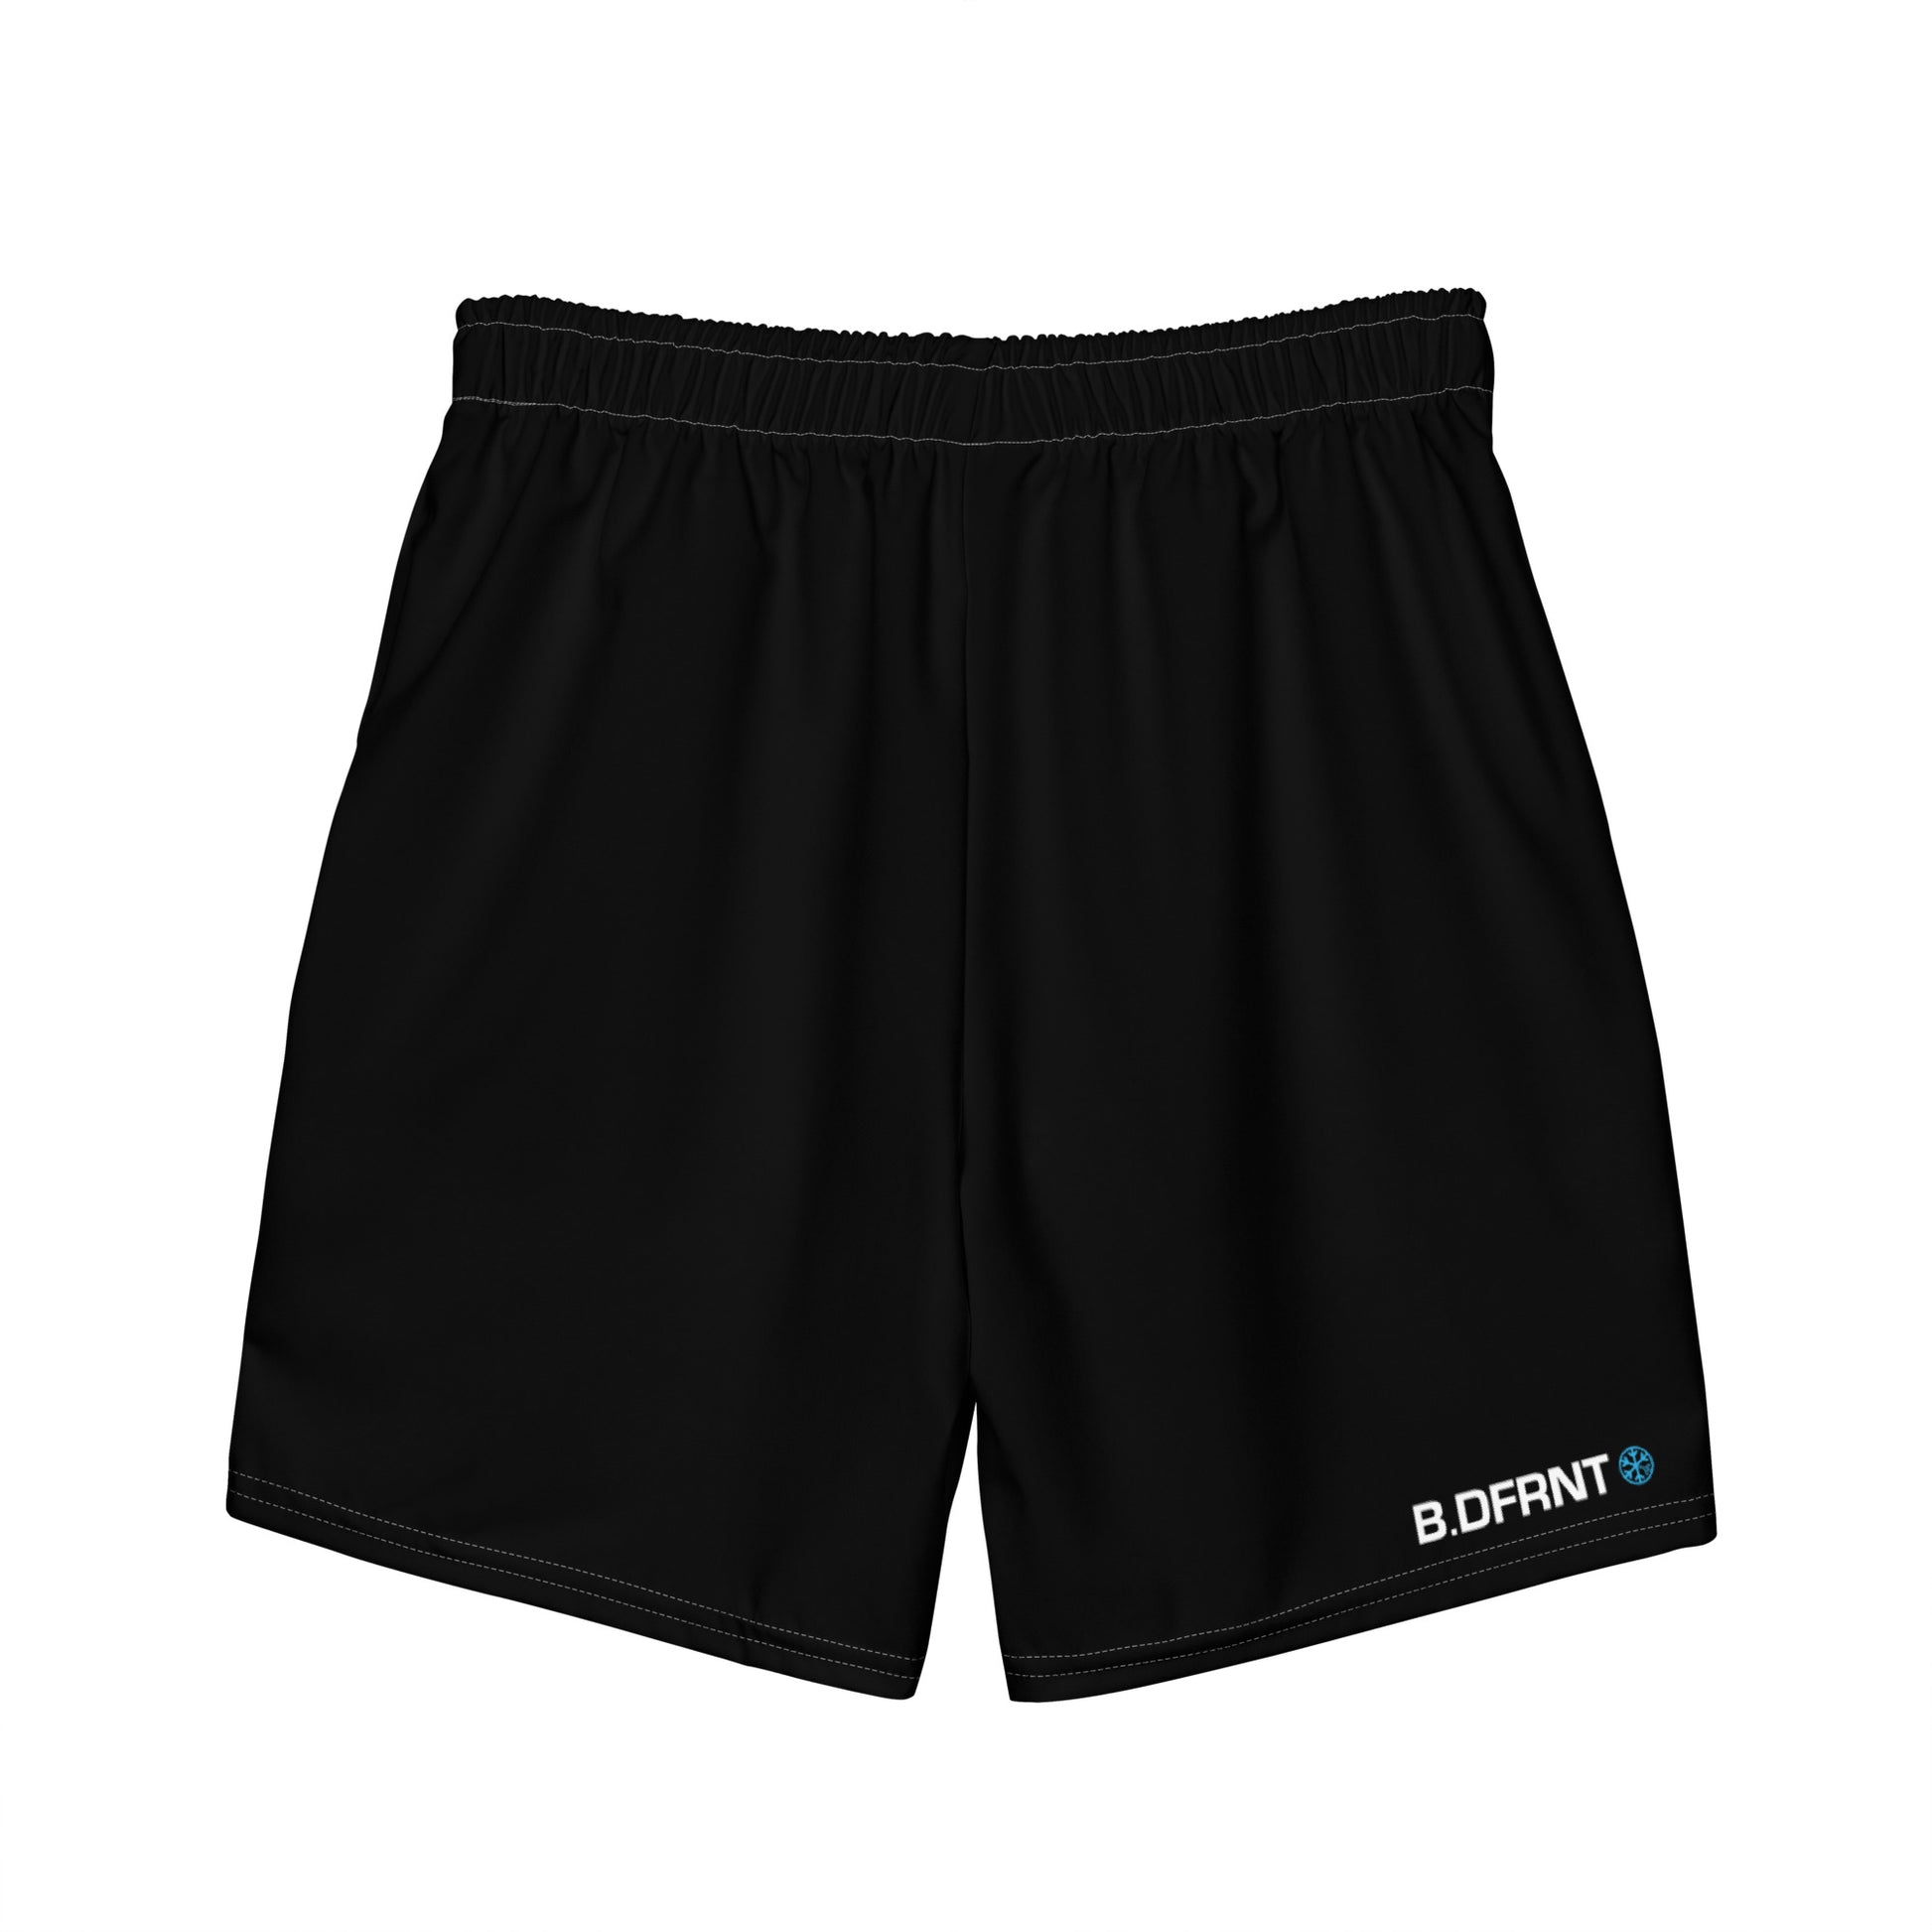 back weirdo tag swim shorts black by B.Different Clothing independent streetwear inspired by street art graffiti